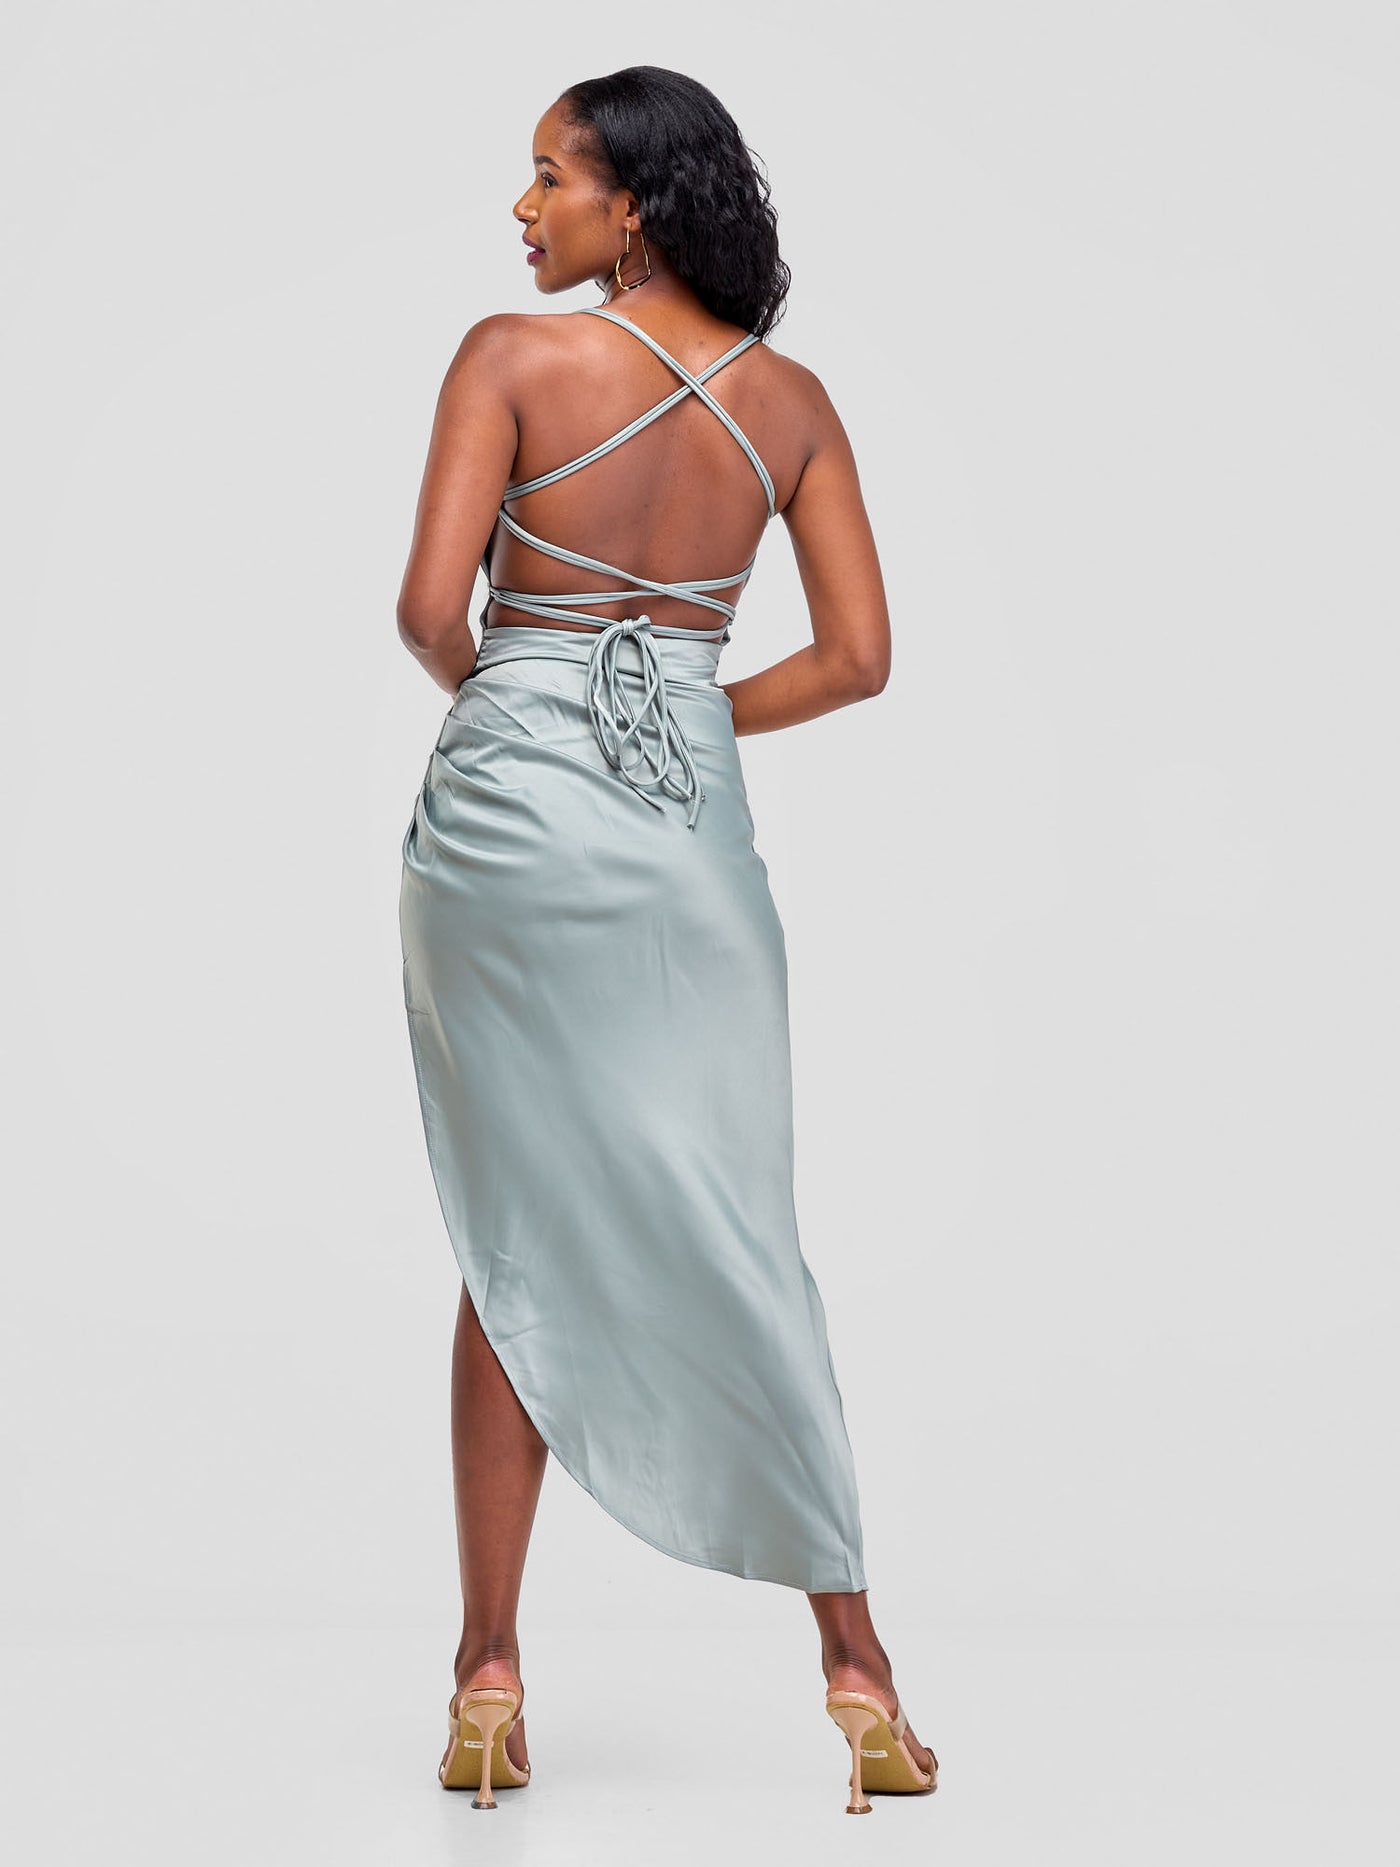 Lola Backless Strappy Satin Dress  With High Side Slit - Green